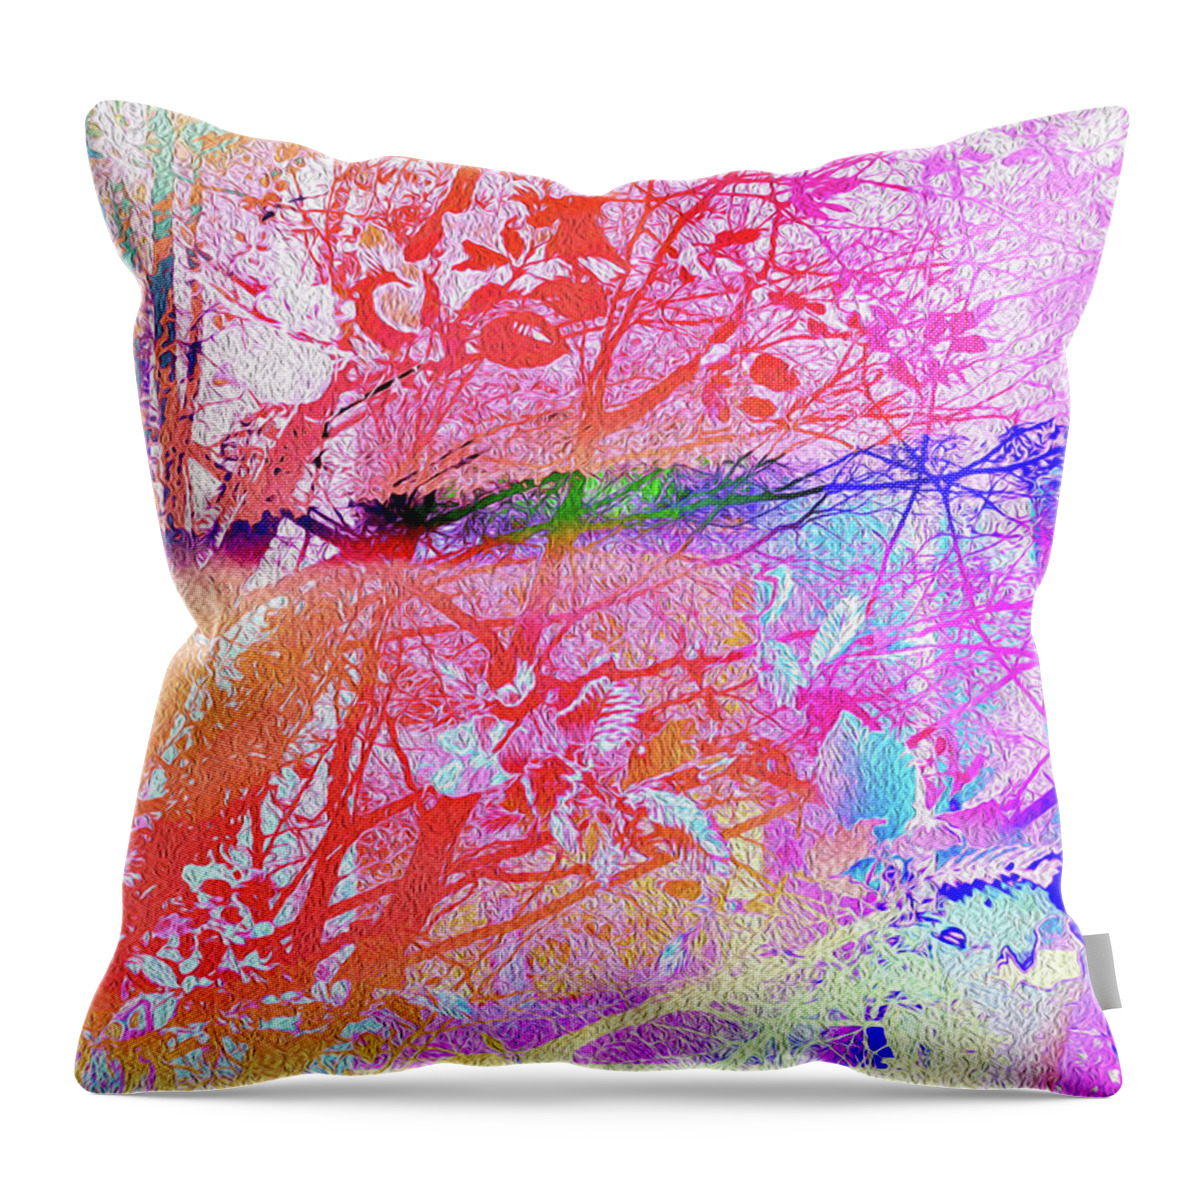 Botanical Throw Pillow featuring the mixed media Remixed Under The Trees Colorful Abstract Landscape by Itsonlythemoon